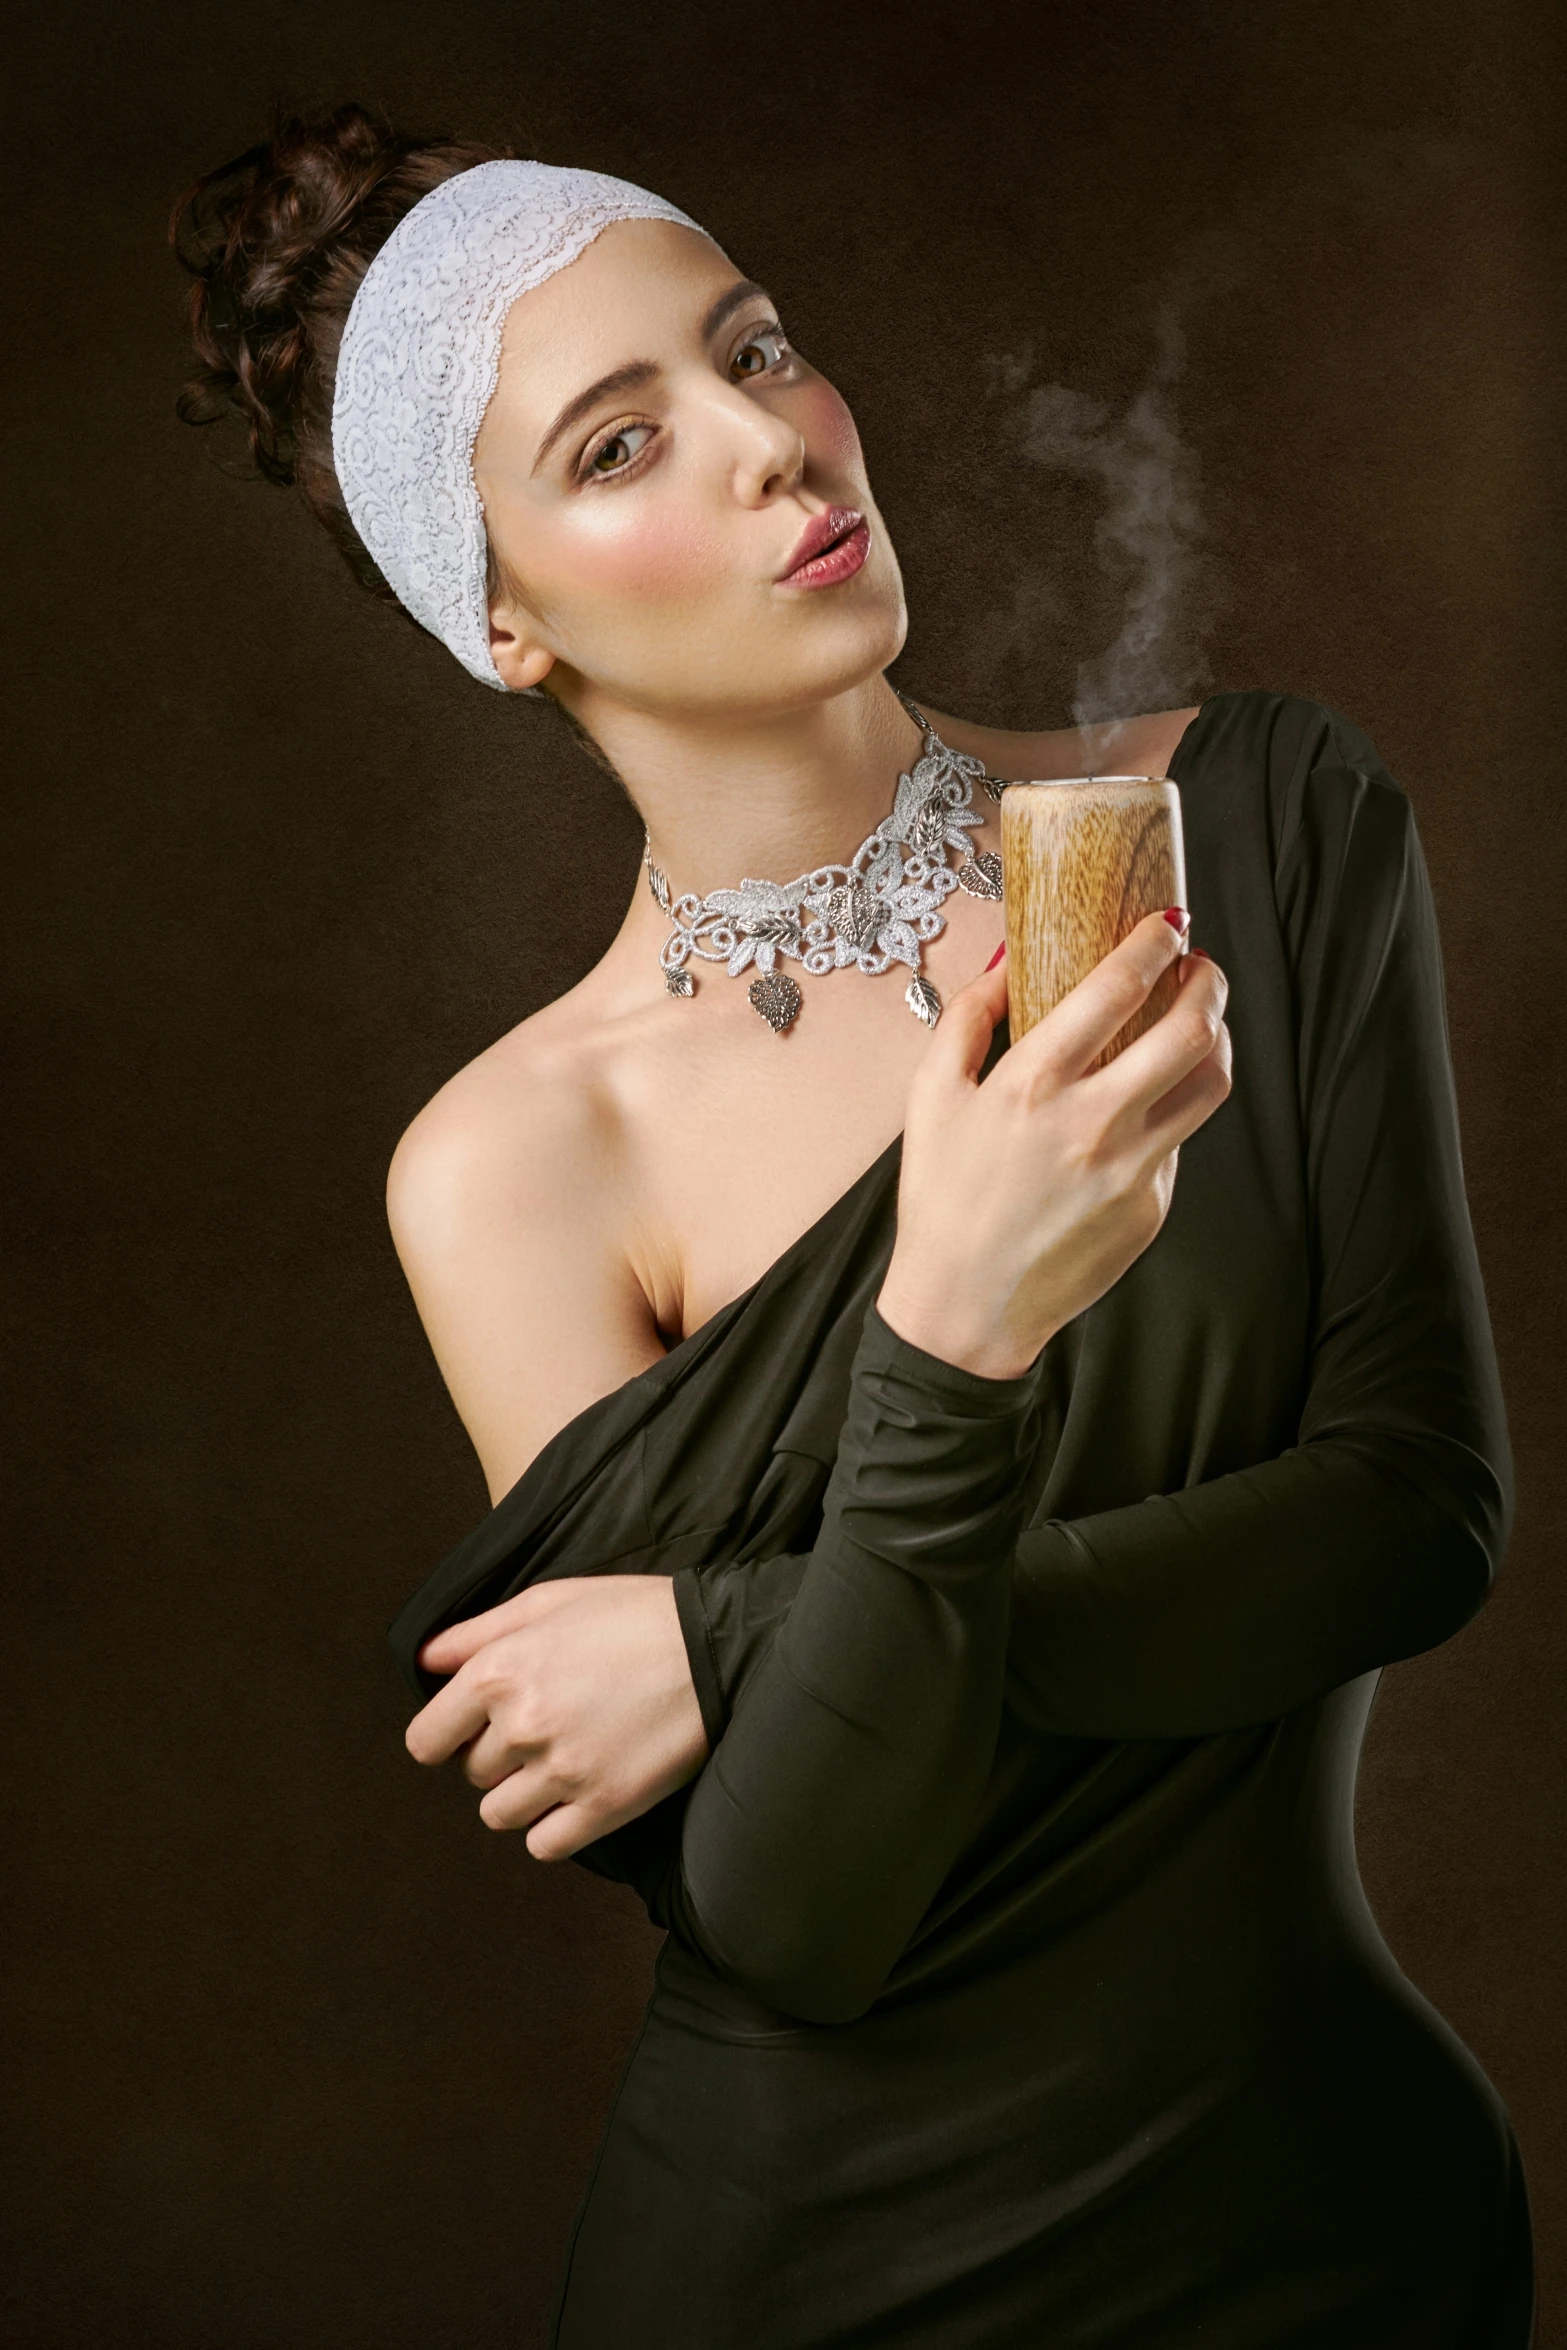 woman wearing black dress smoking a cigarette and holding a brown cup